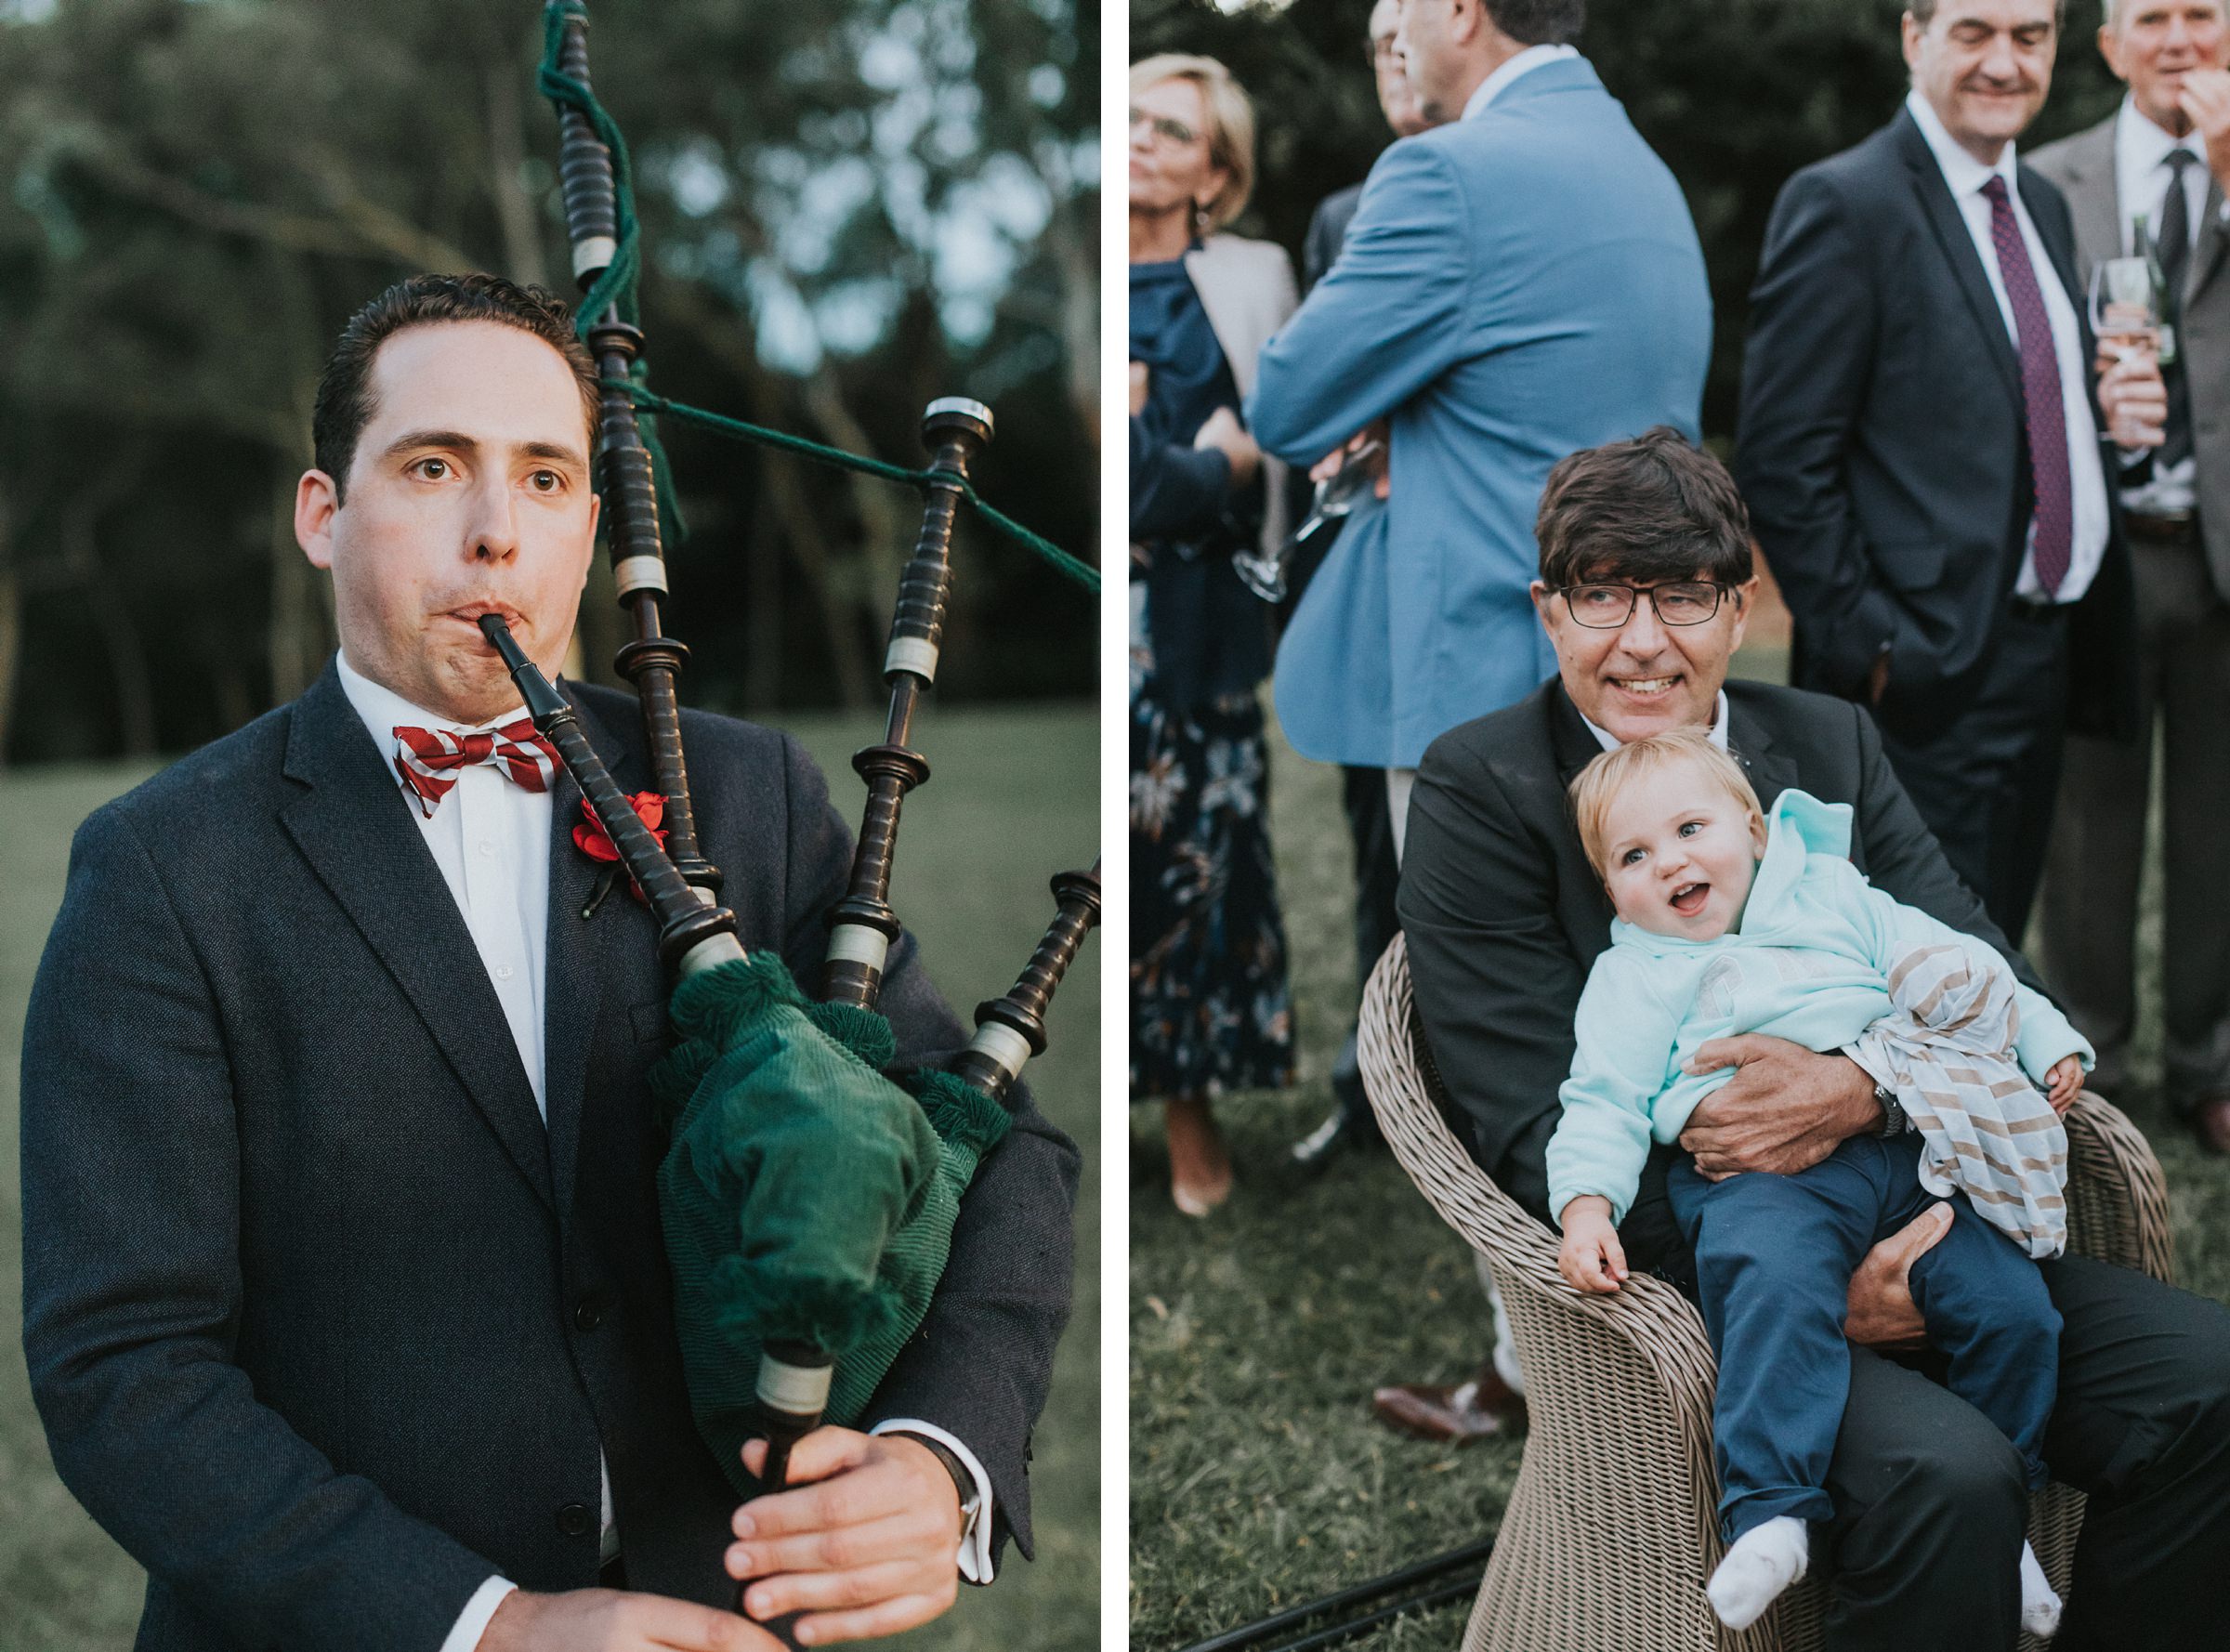 brides brother duncan mckay playing the bagpipes